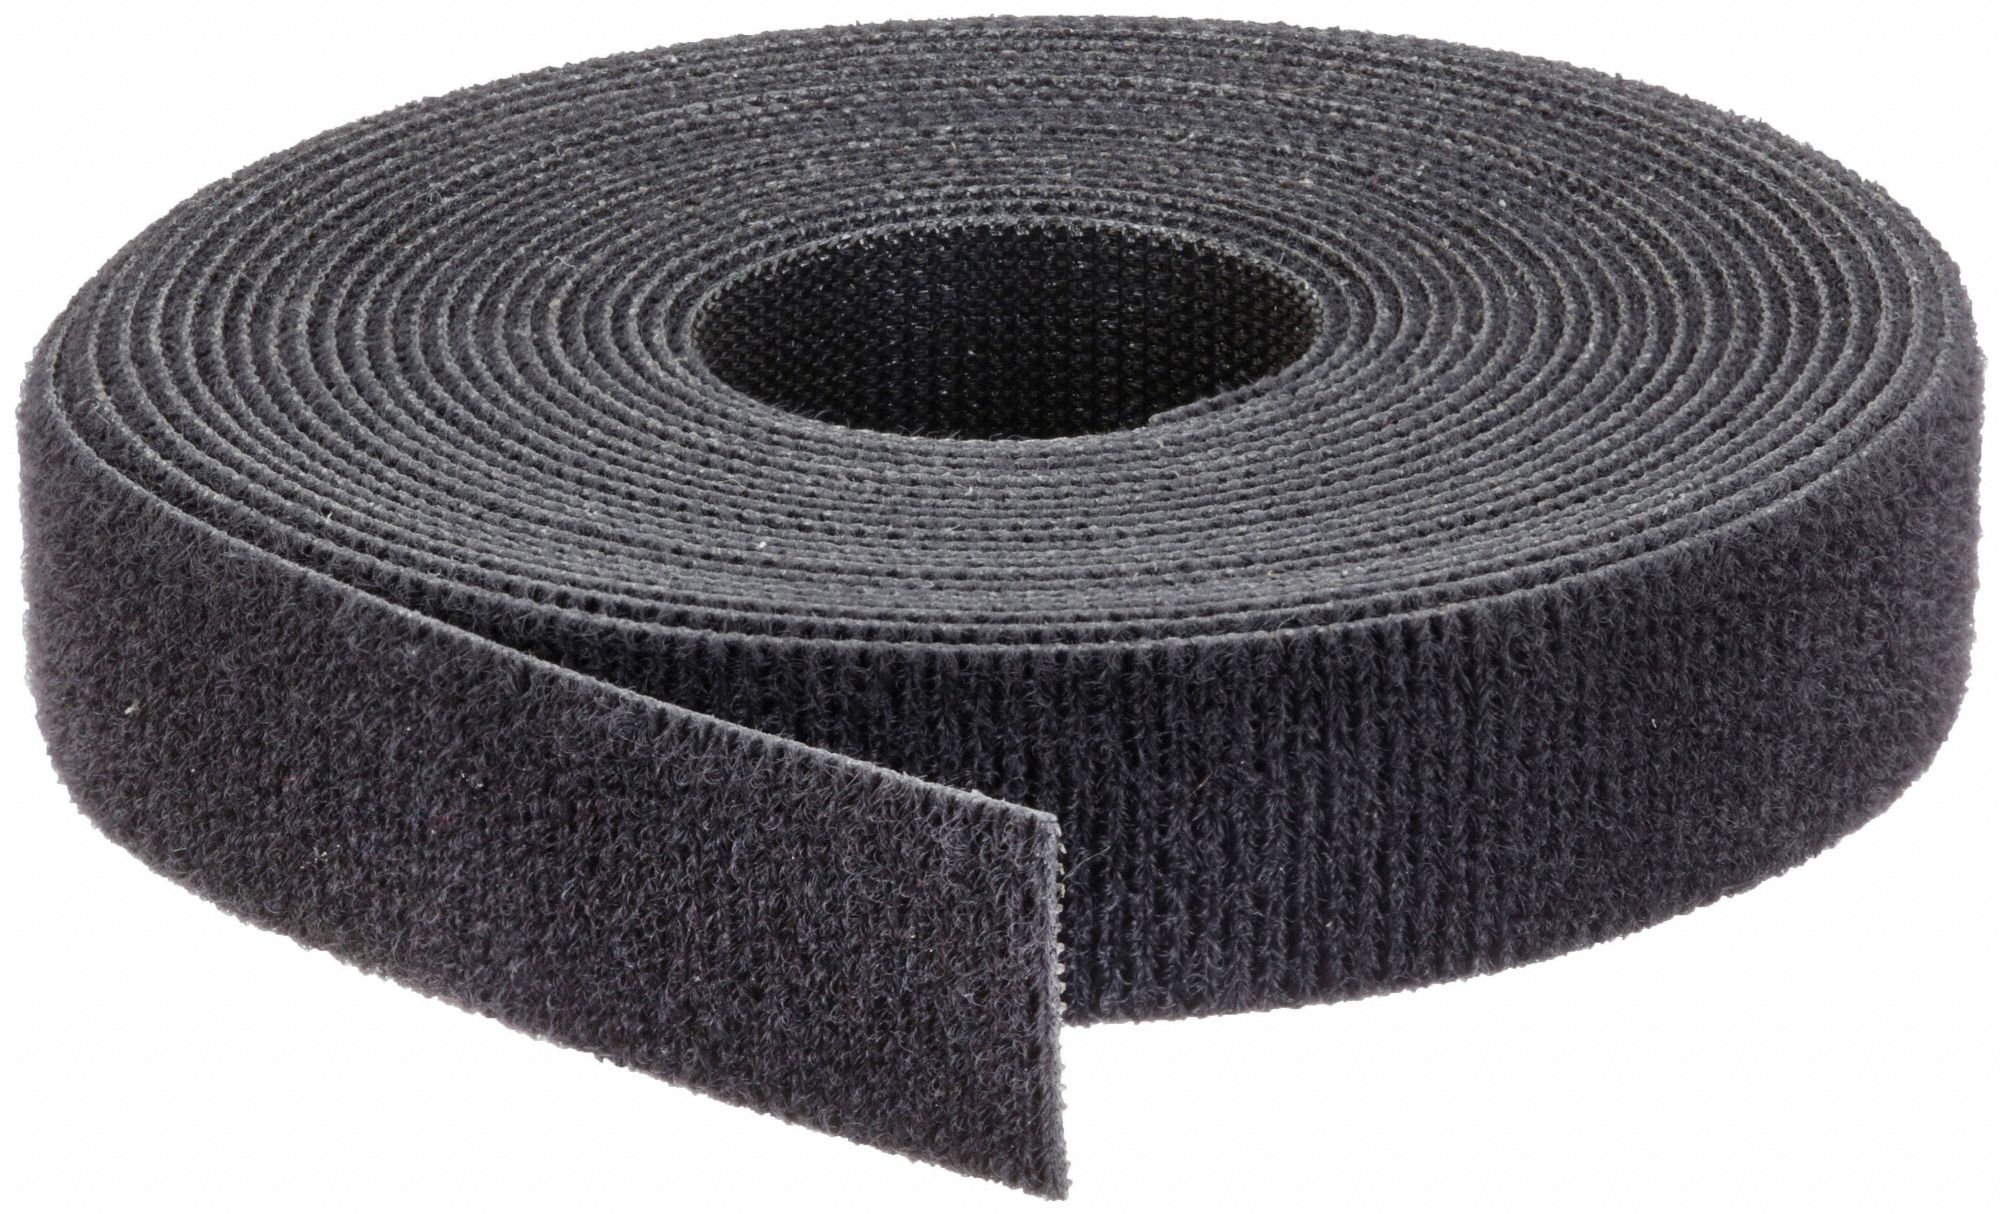 HOOK-AND-LOOP CABLE TIE ROLL, 15 FT L, 0.75 IN W, 50 LB TENSILE STRENGTH,  BLACK